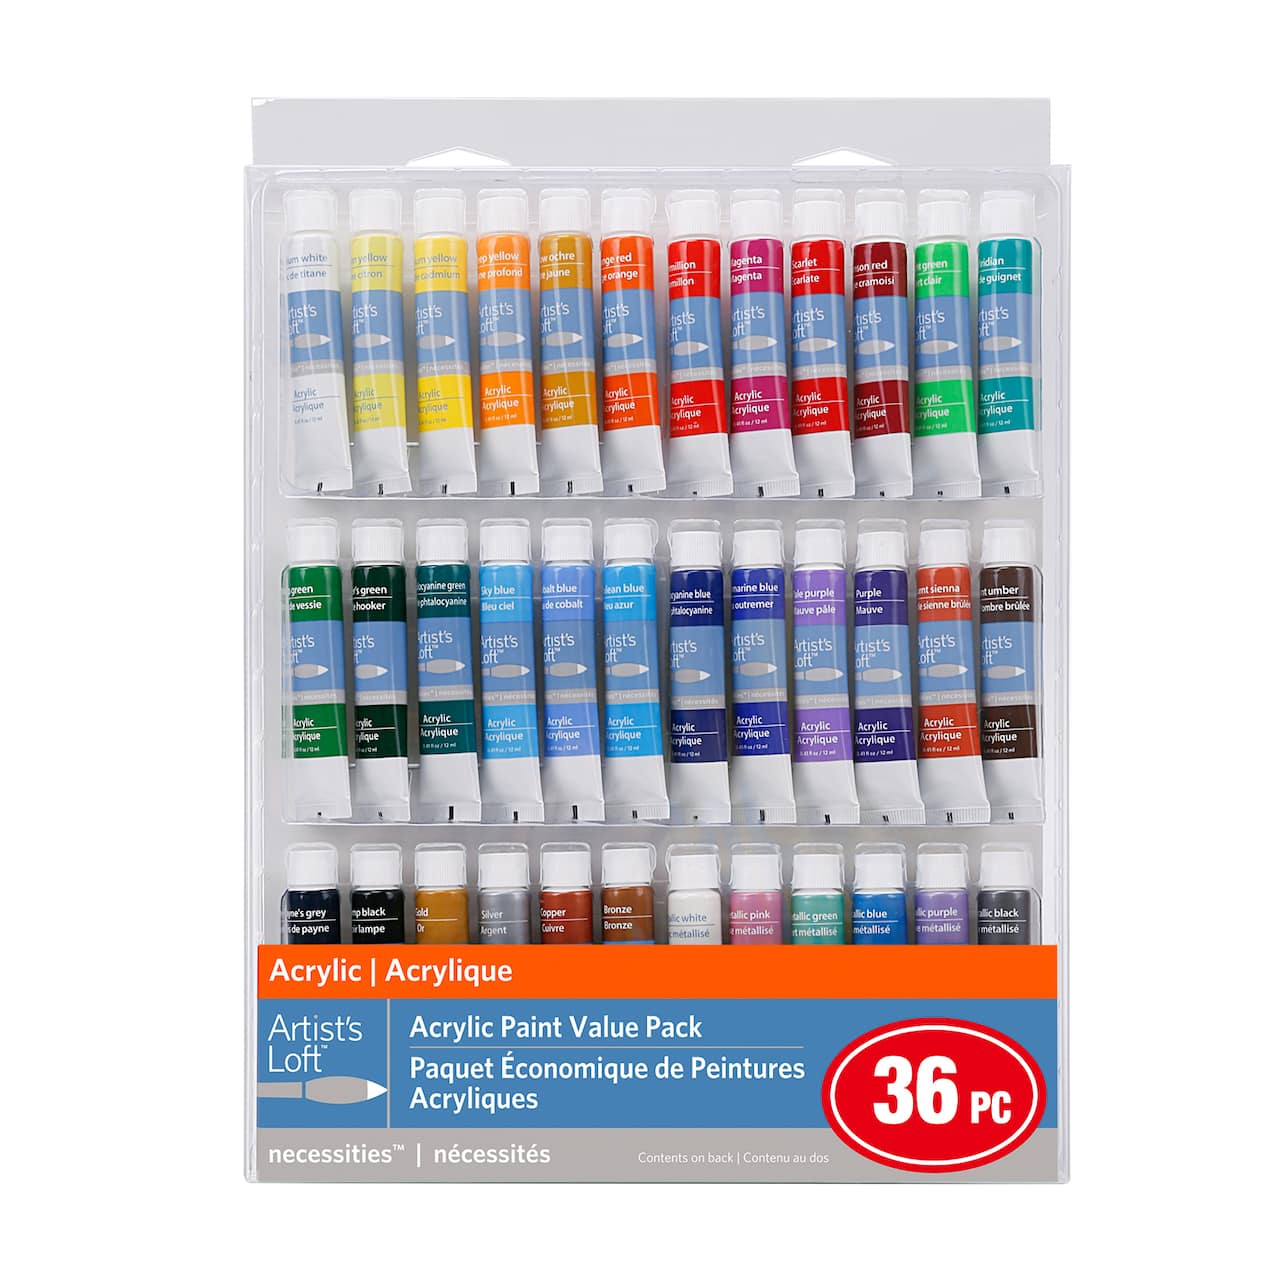 12 Packs: 36 ct. (432 total) Acrylic Paint Value Pack by Artist's